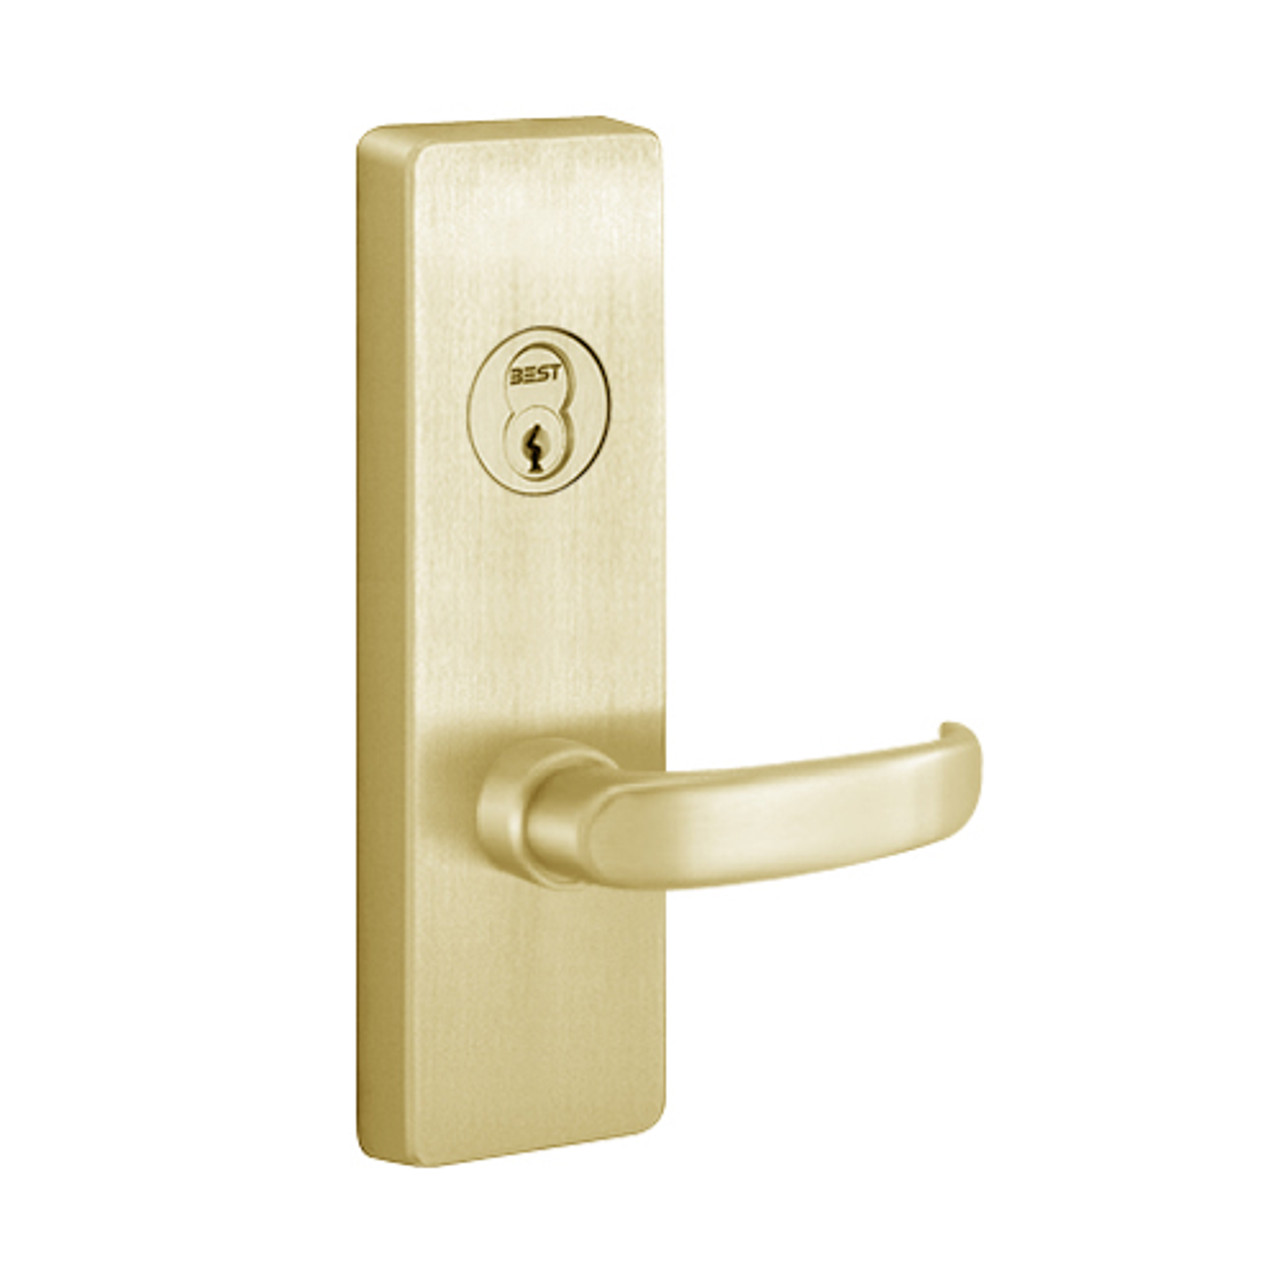 R4903D-605-RHR PHI Key Retracts Latchbolt Retrofit Trim with D Lever Design for Apex and Olympian Series Exit Device in Bright Brass Finish